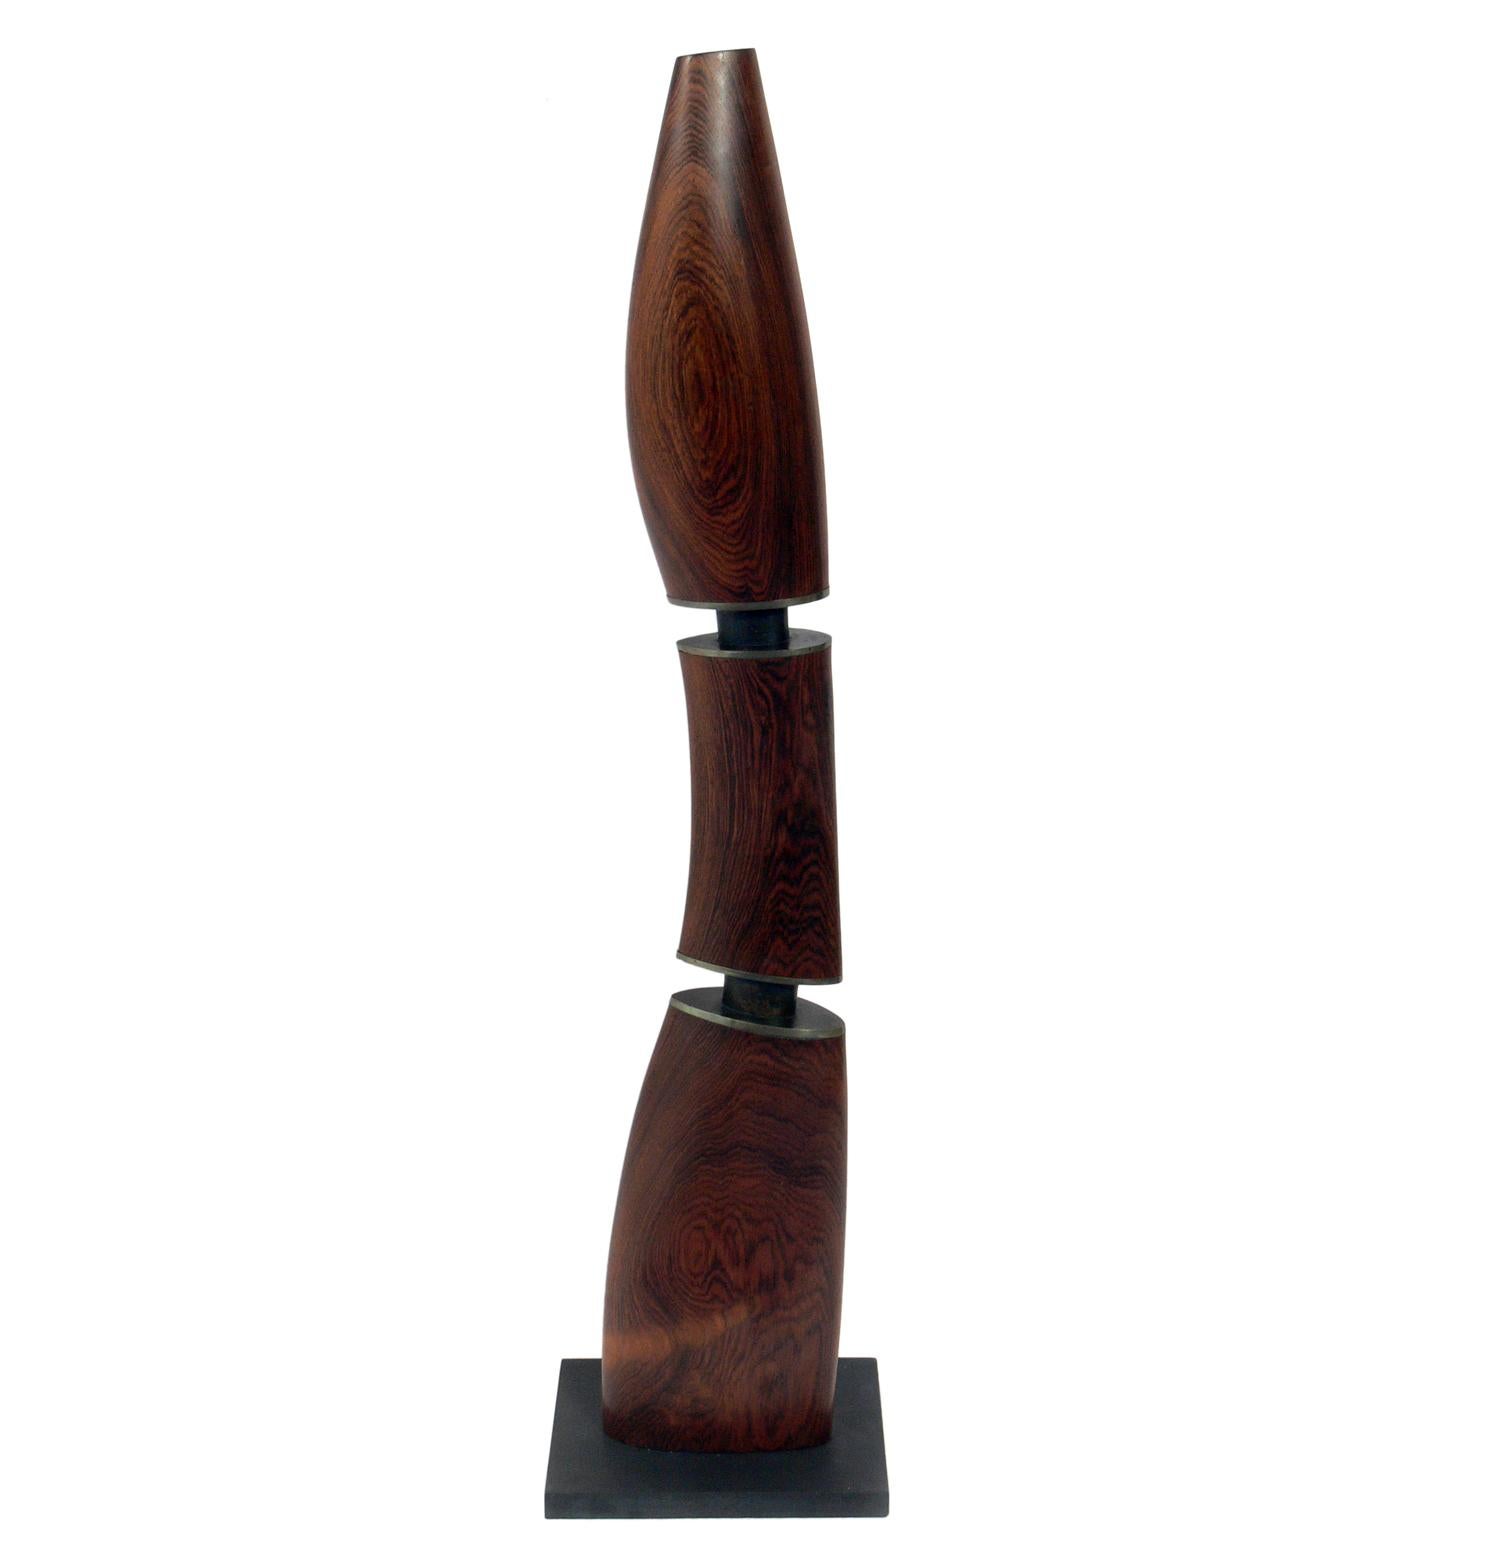 Rosewood and Bronze Totem Sculpture by Alden Smith